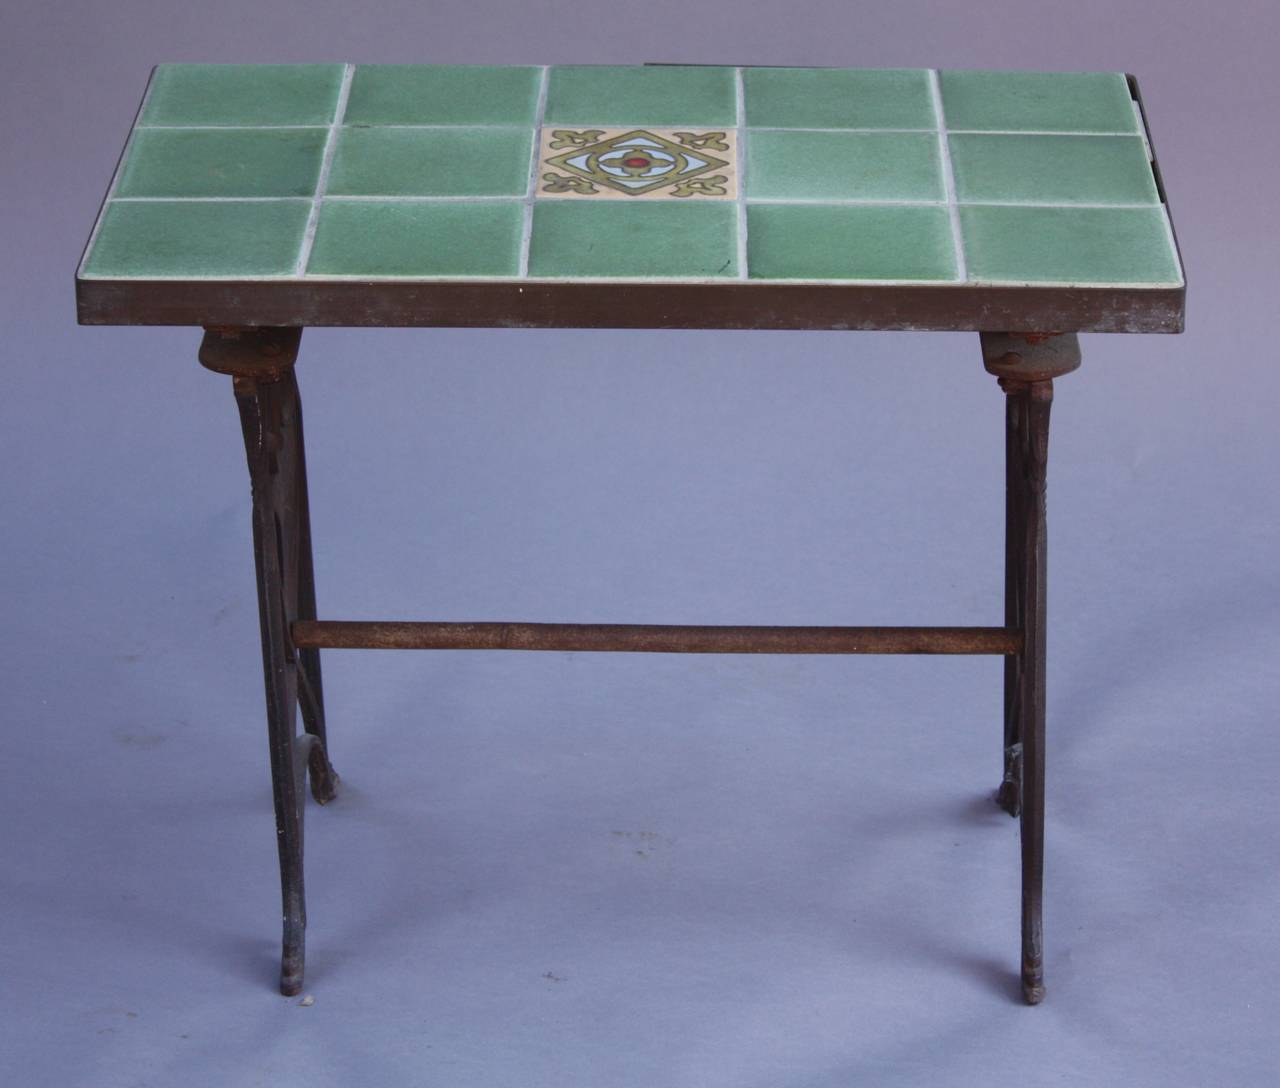 Circa 1920's rare tile table with polychrome crest motif on side and original period tiles.